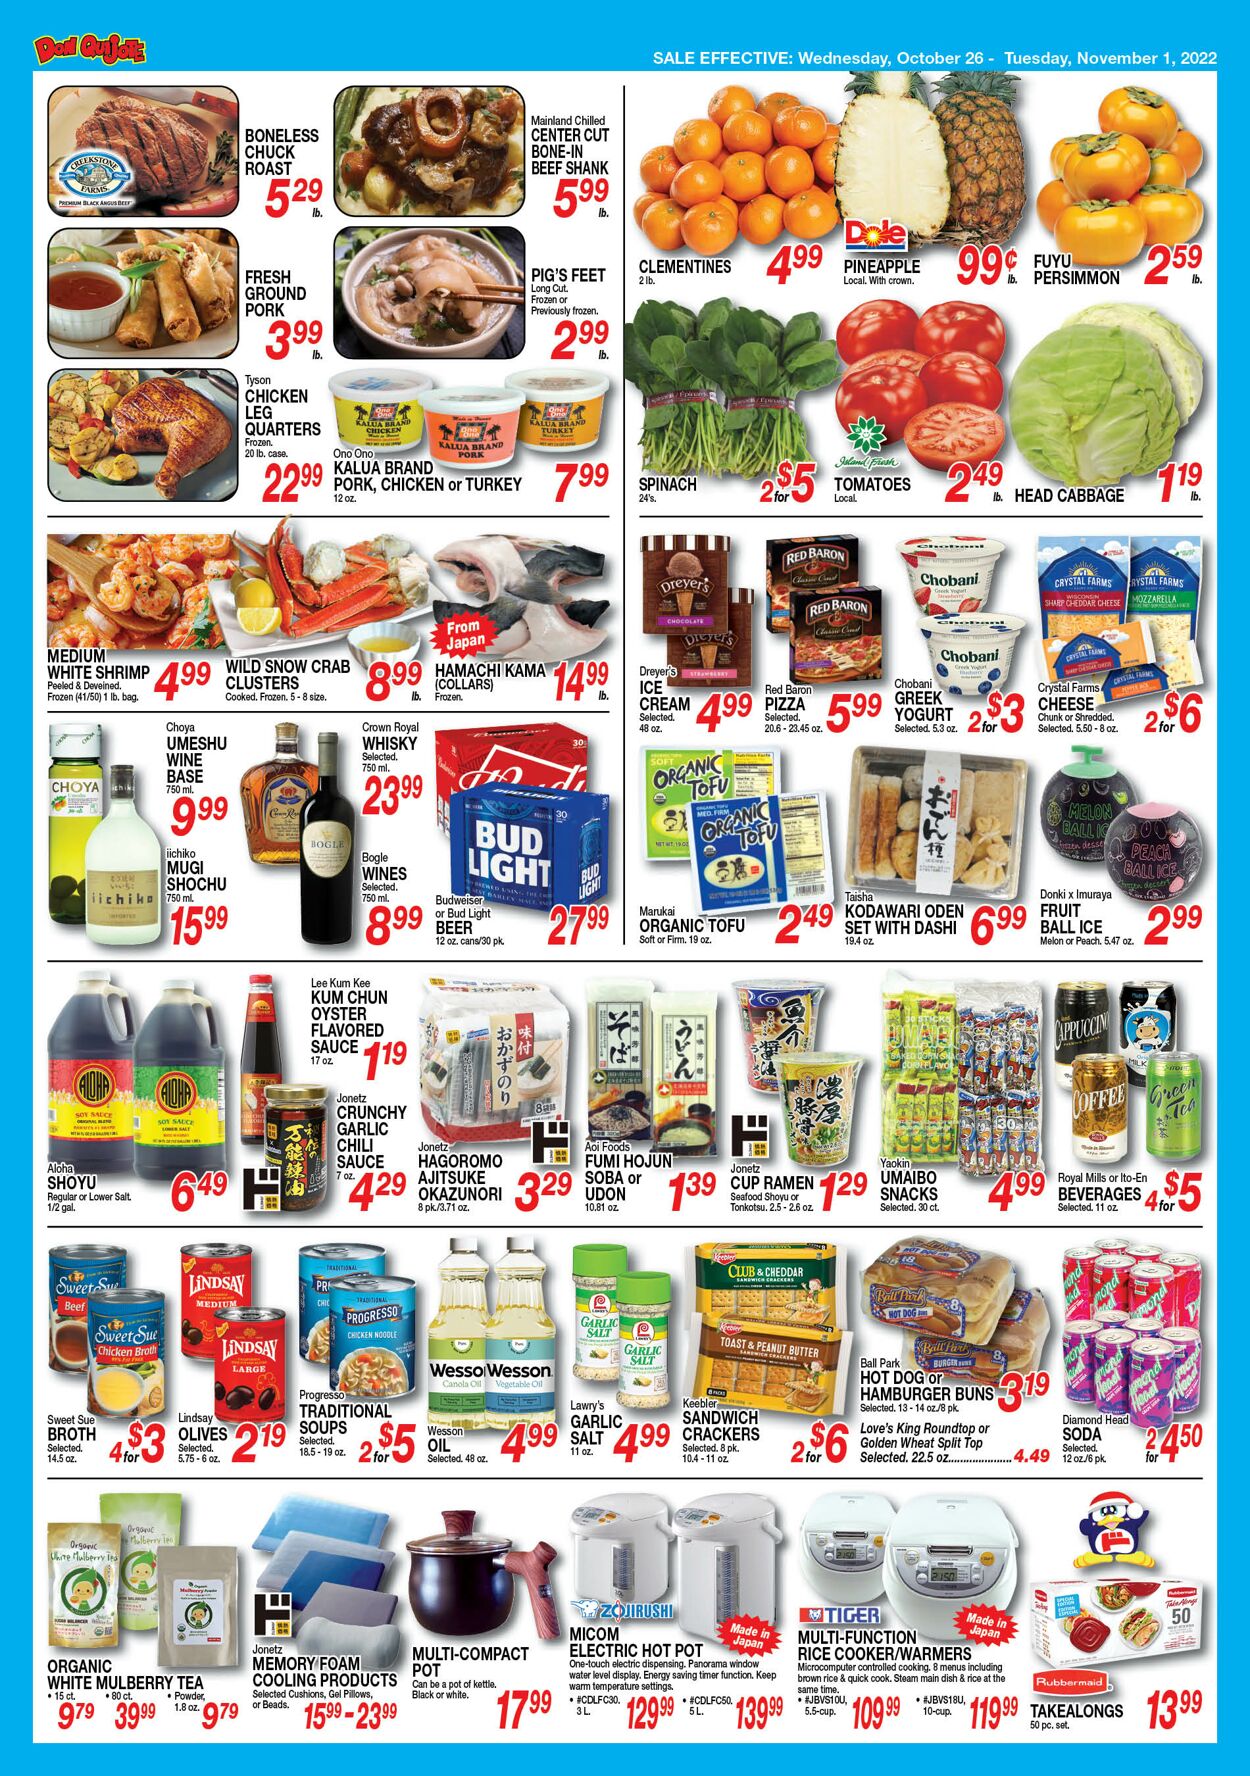 Catalogue Don Quijote Hawaii from 10/26/2022